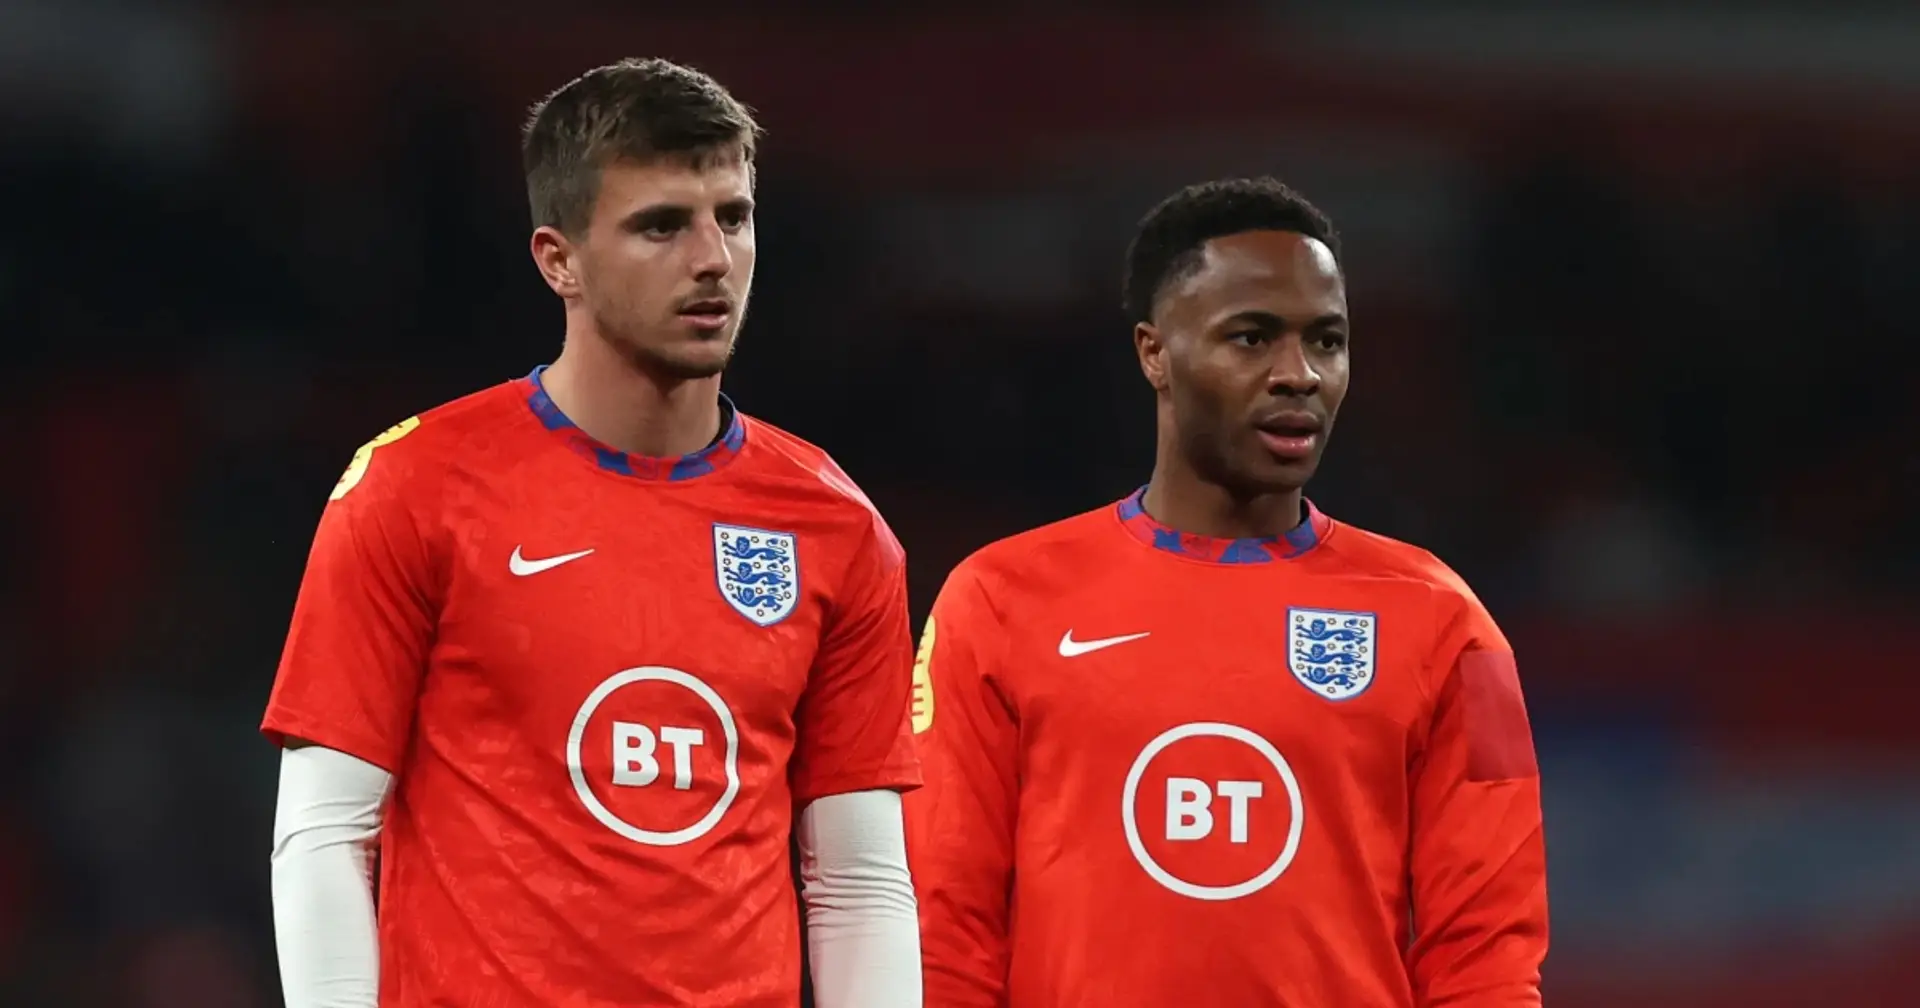 Mason Mount and Raheem Sterling set to be rested for England vs Wales - The Telegraph